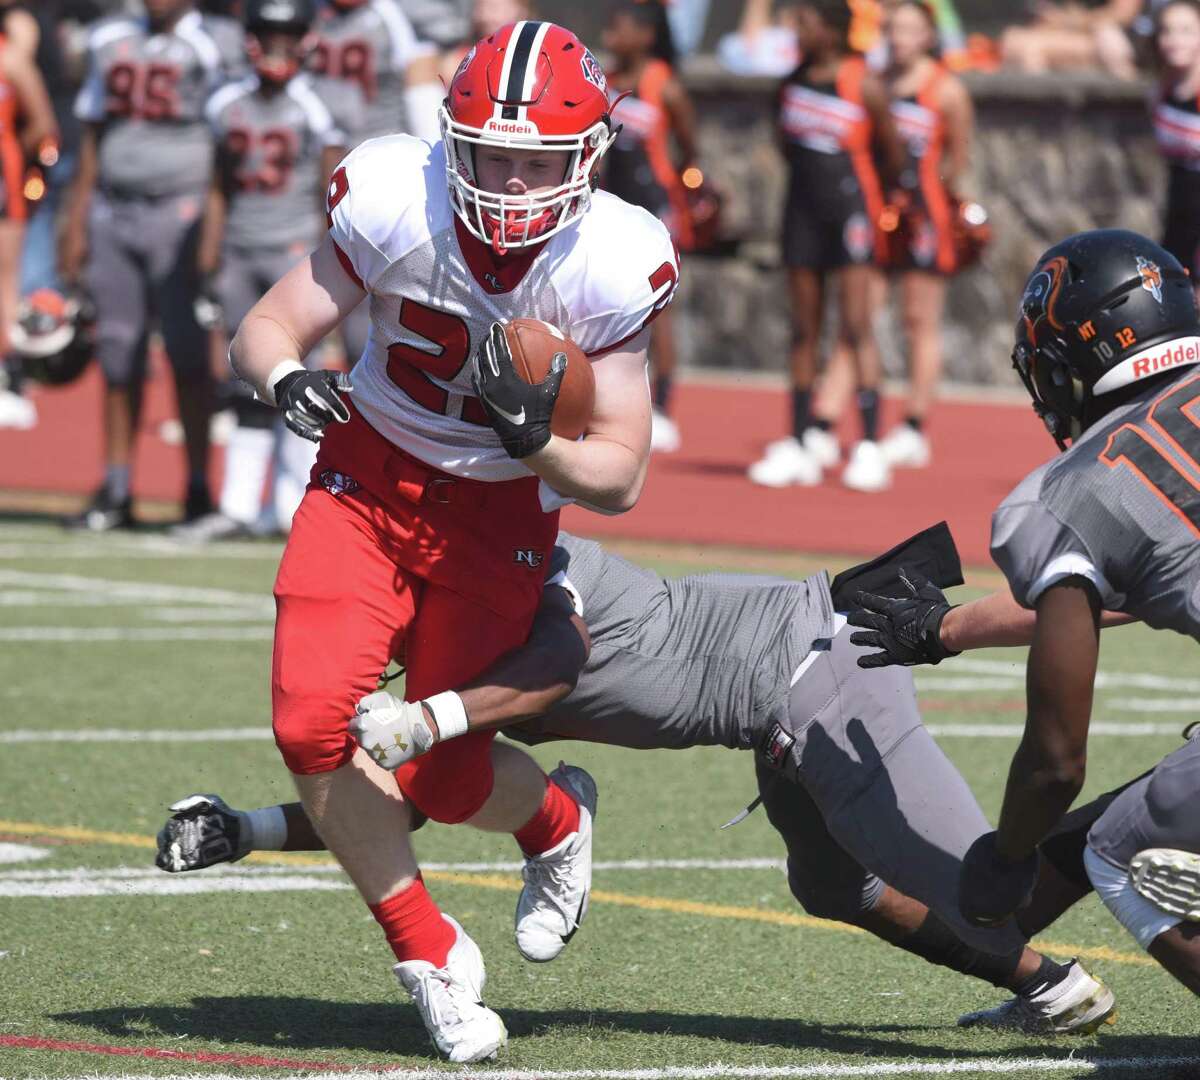 New Canaan's John Wise (29) evades a tackle on the way to one of his four touchdowns during a football game between New Canaan and Stamford at Boyle Stadium in Stamford on Saturday, Sept. 28, 2019.